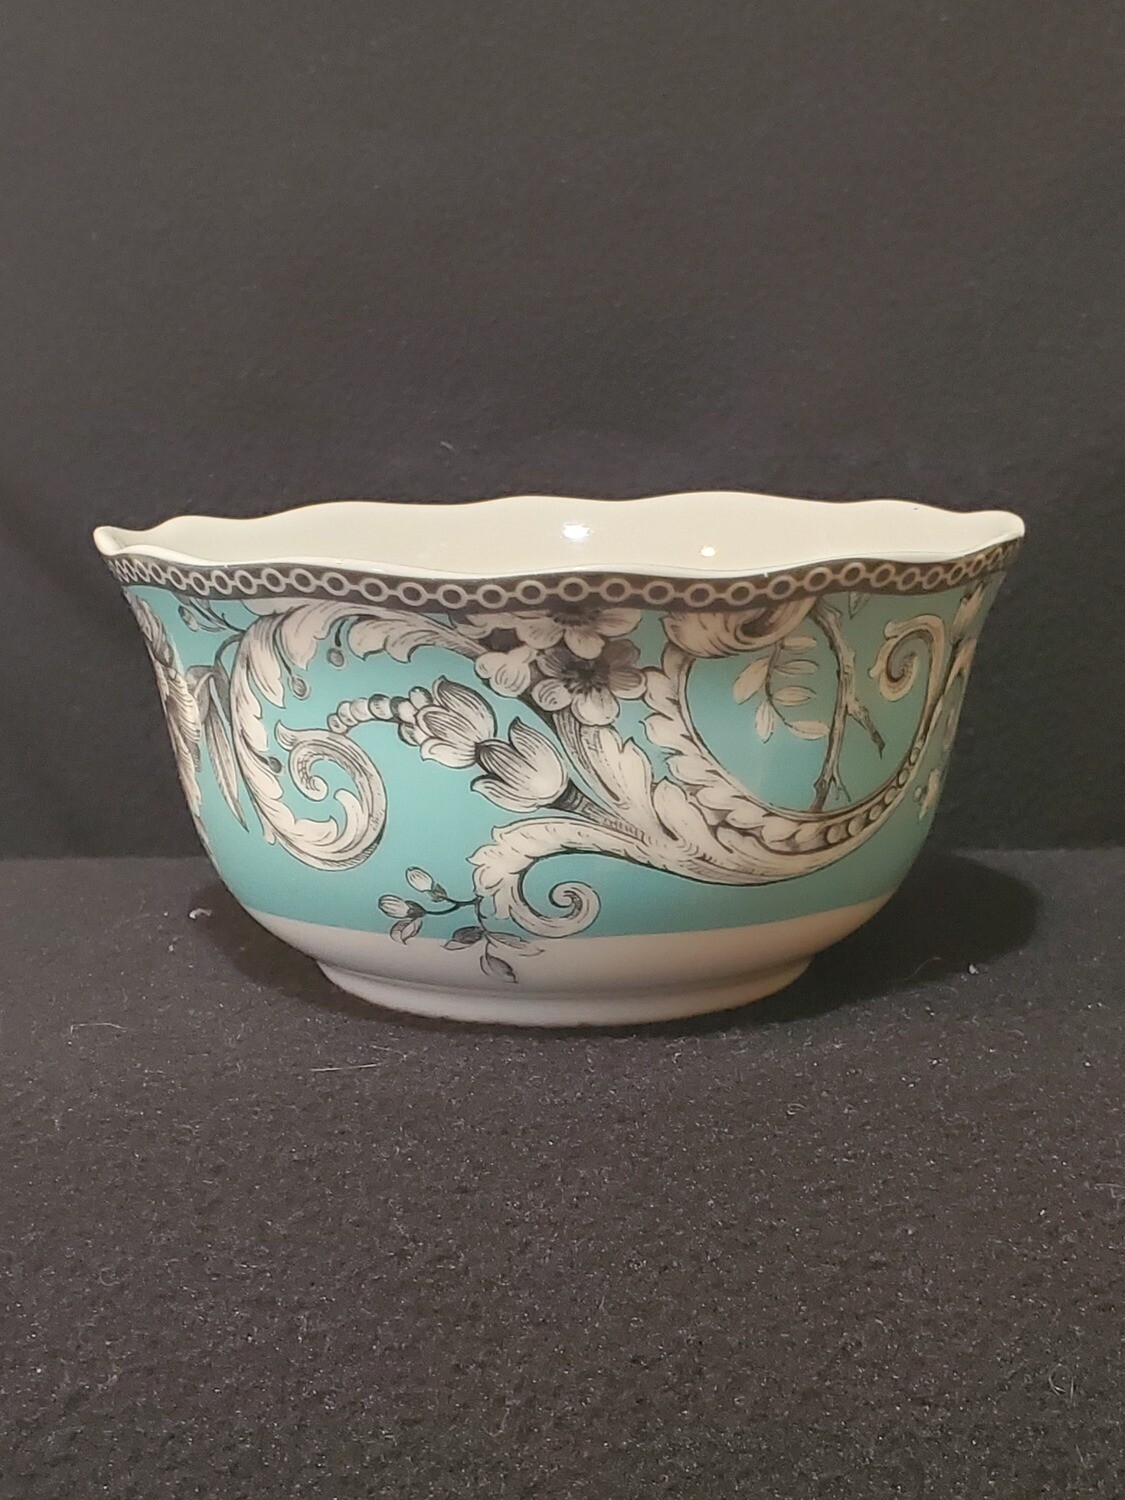 Soup/Cereal Bowl, Adelaide Turquoise, 222 Fifth, 5 5/8" x 2 3/4"